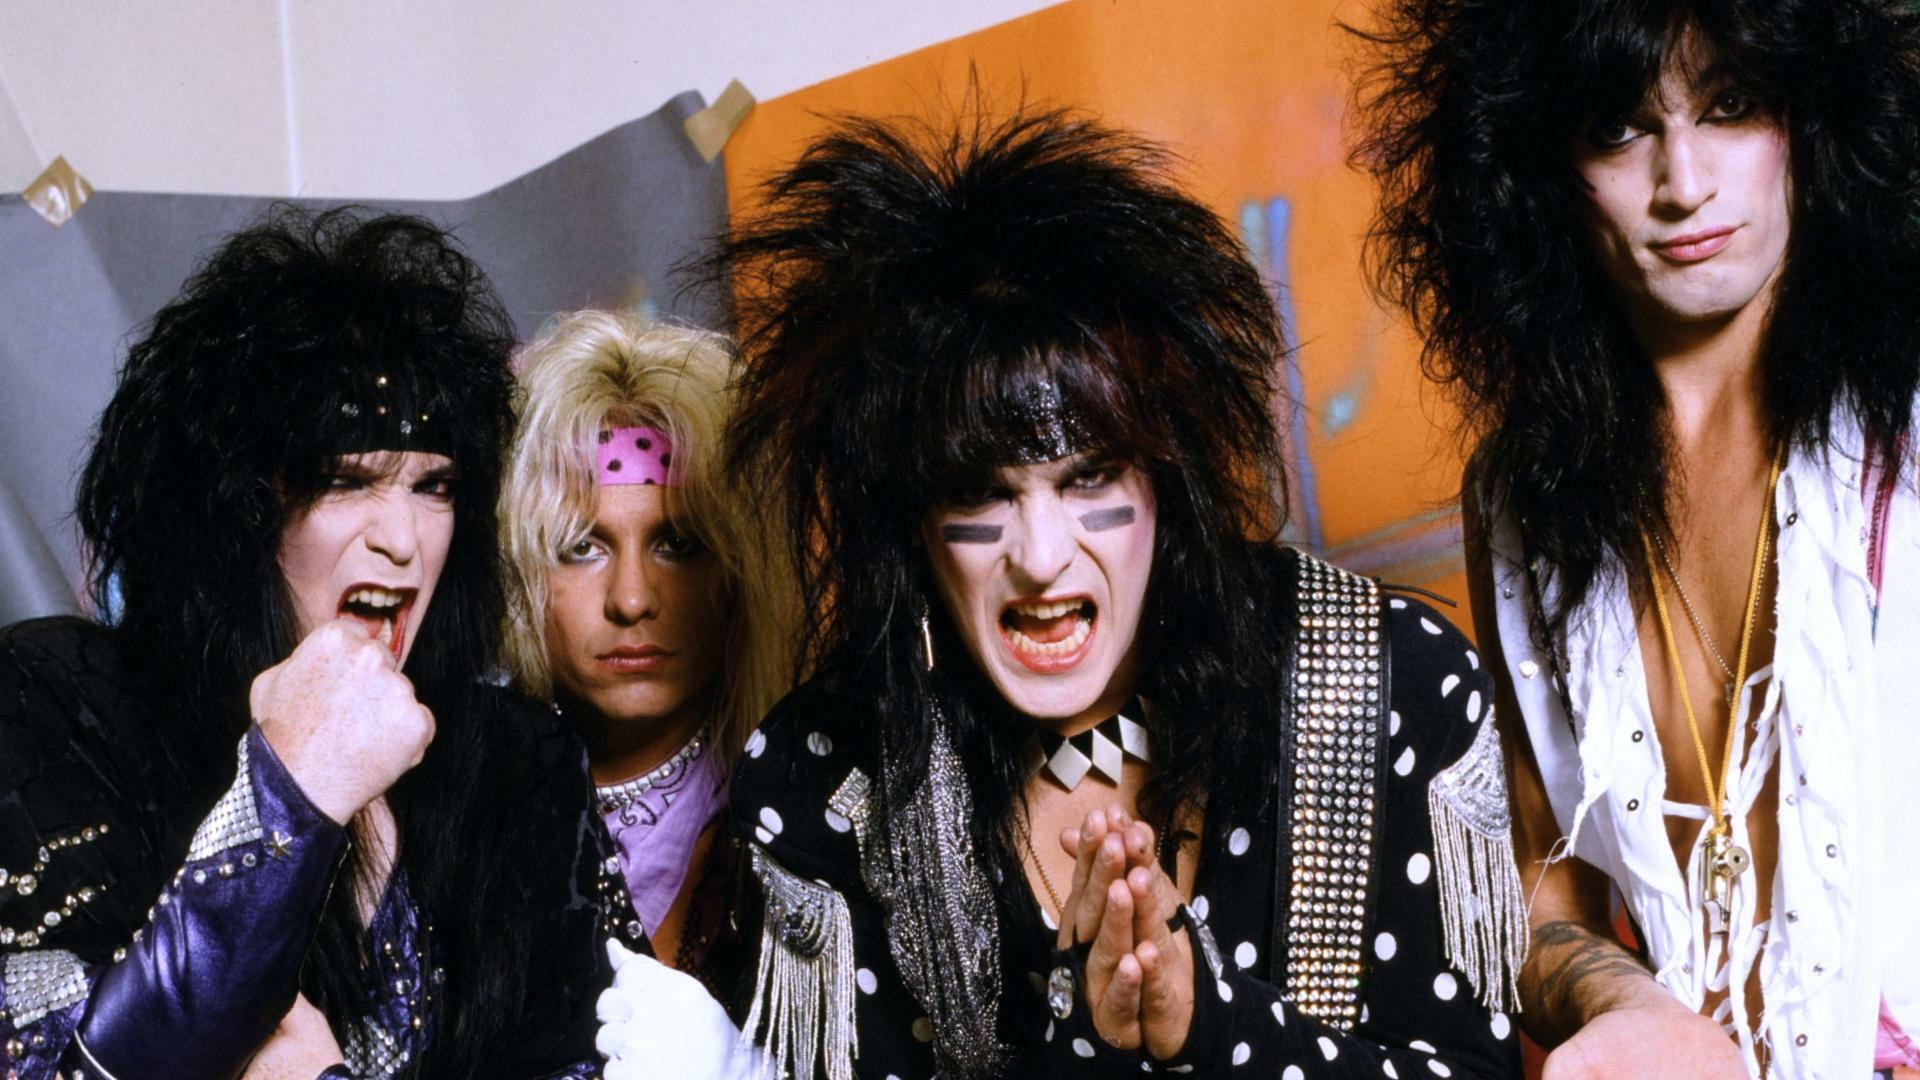 Watch Behind The Music Season 1 Episode 21: Motley Crue - Full show on  Paramount Plus